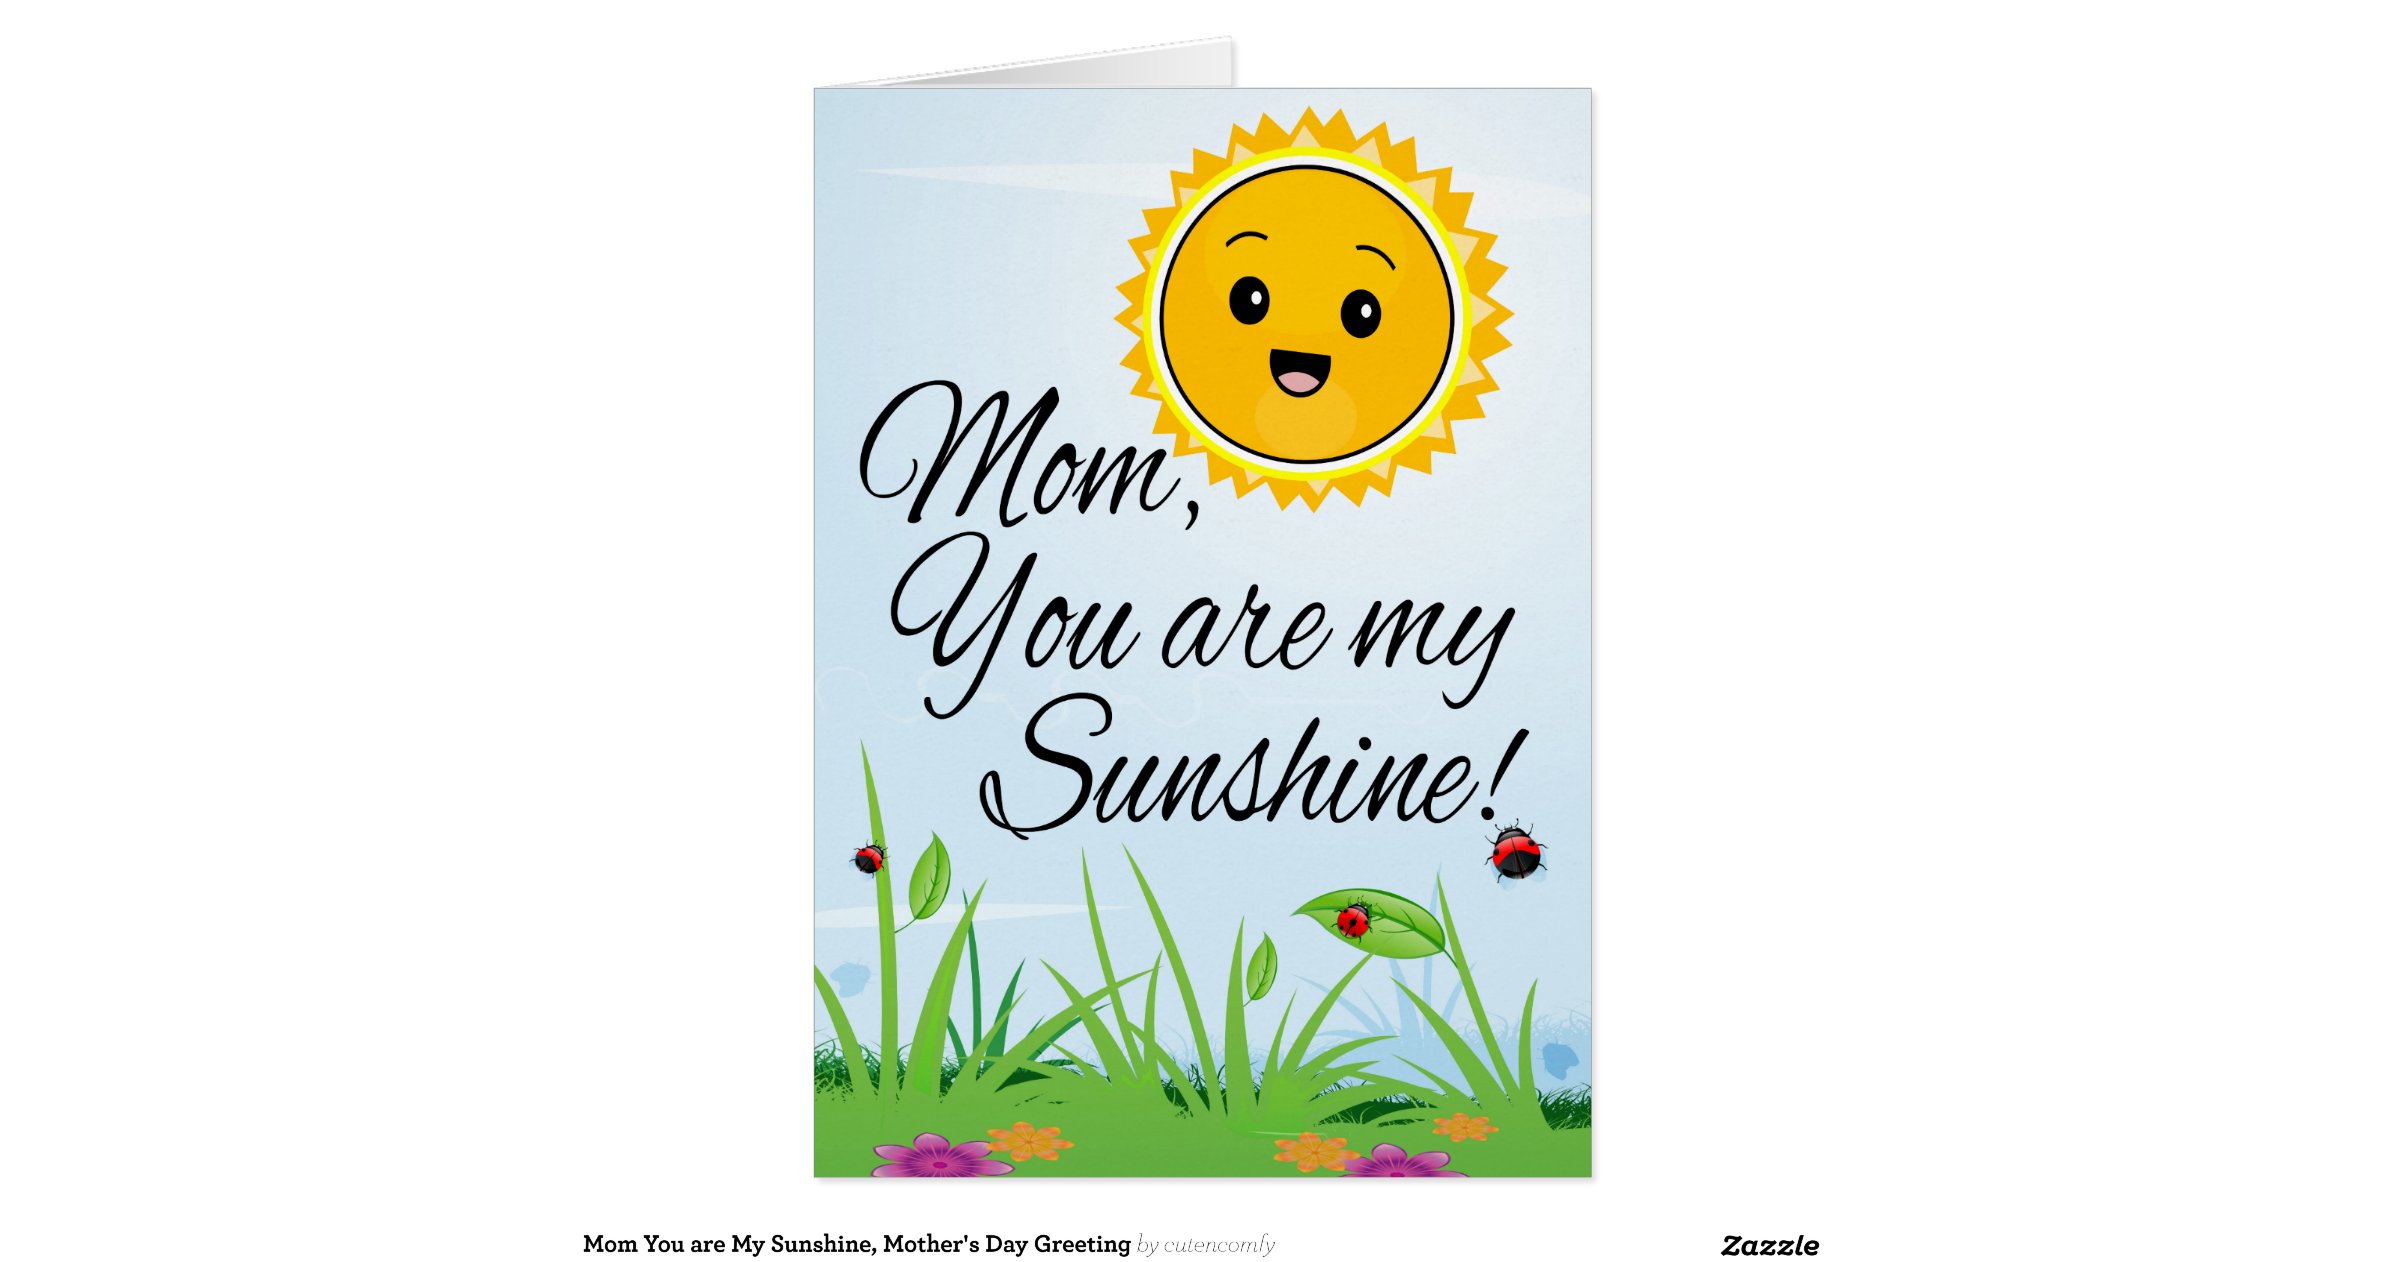 mom_you_are_my_sunshine_mothers_day_greeting_greeting_card